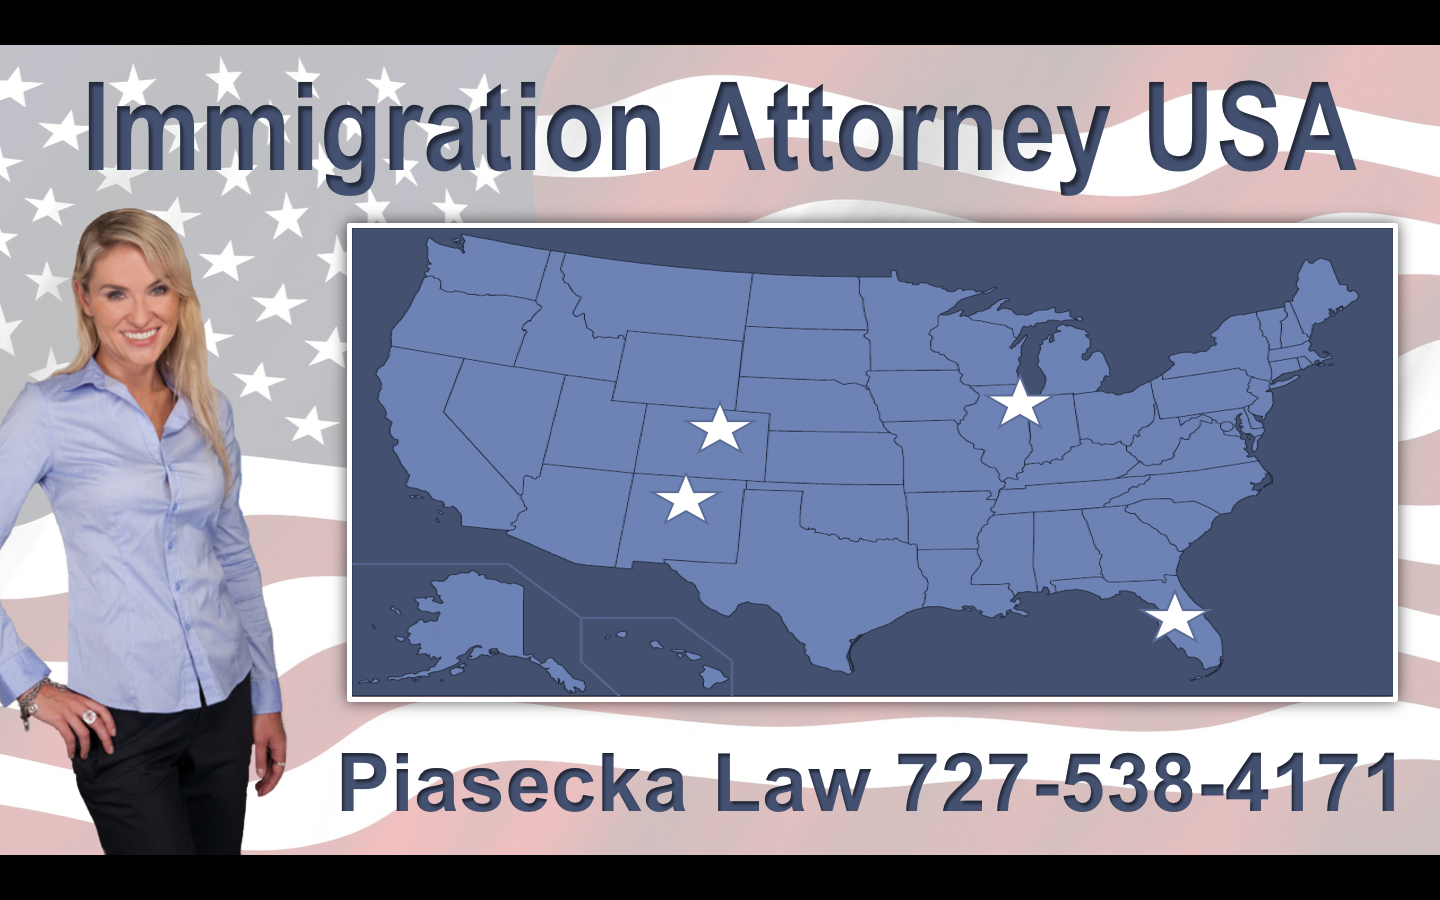 Immigration-Attorney-USA-Piasecka-Law